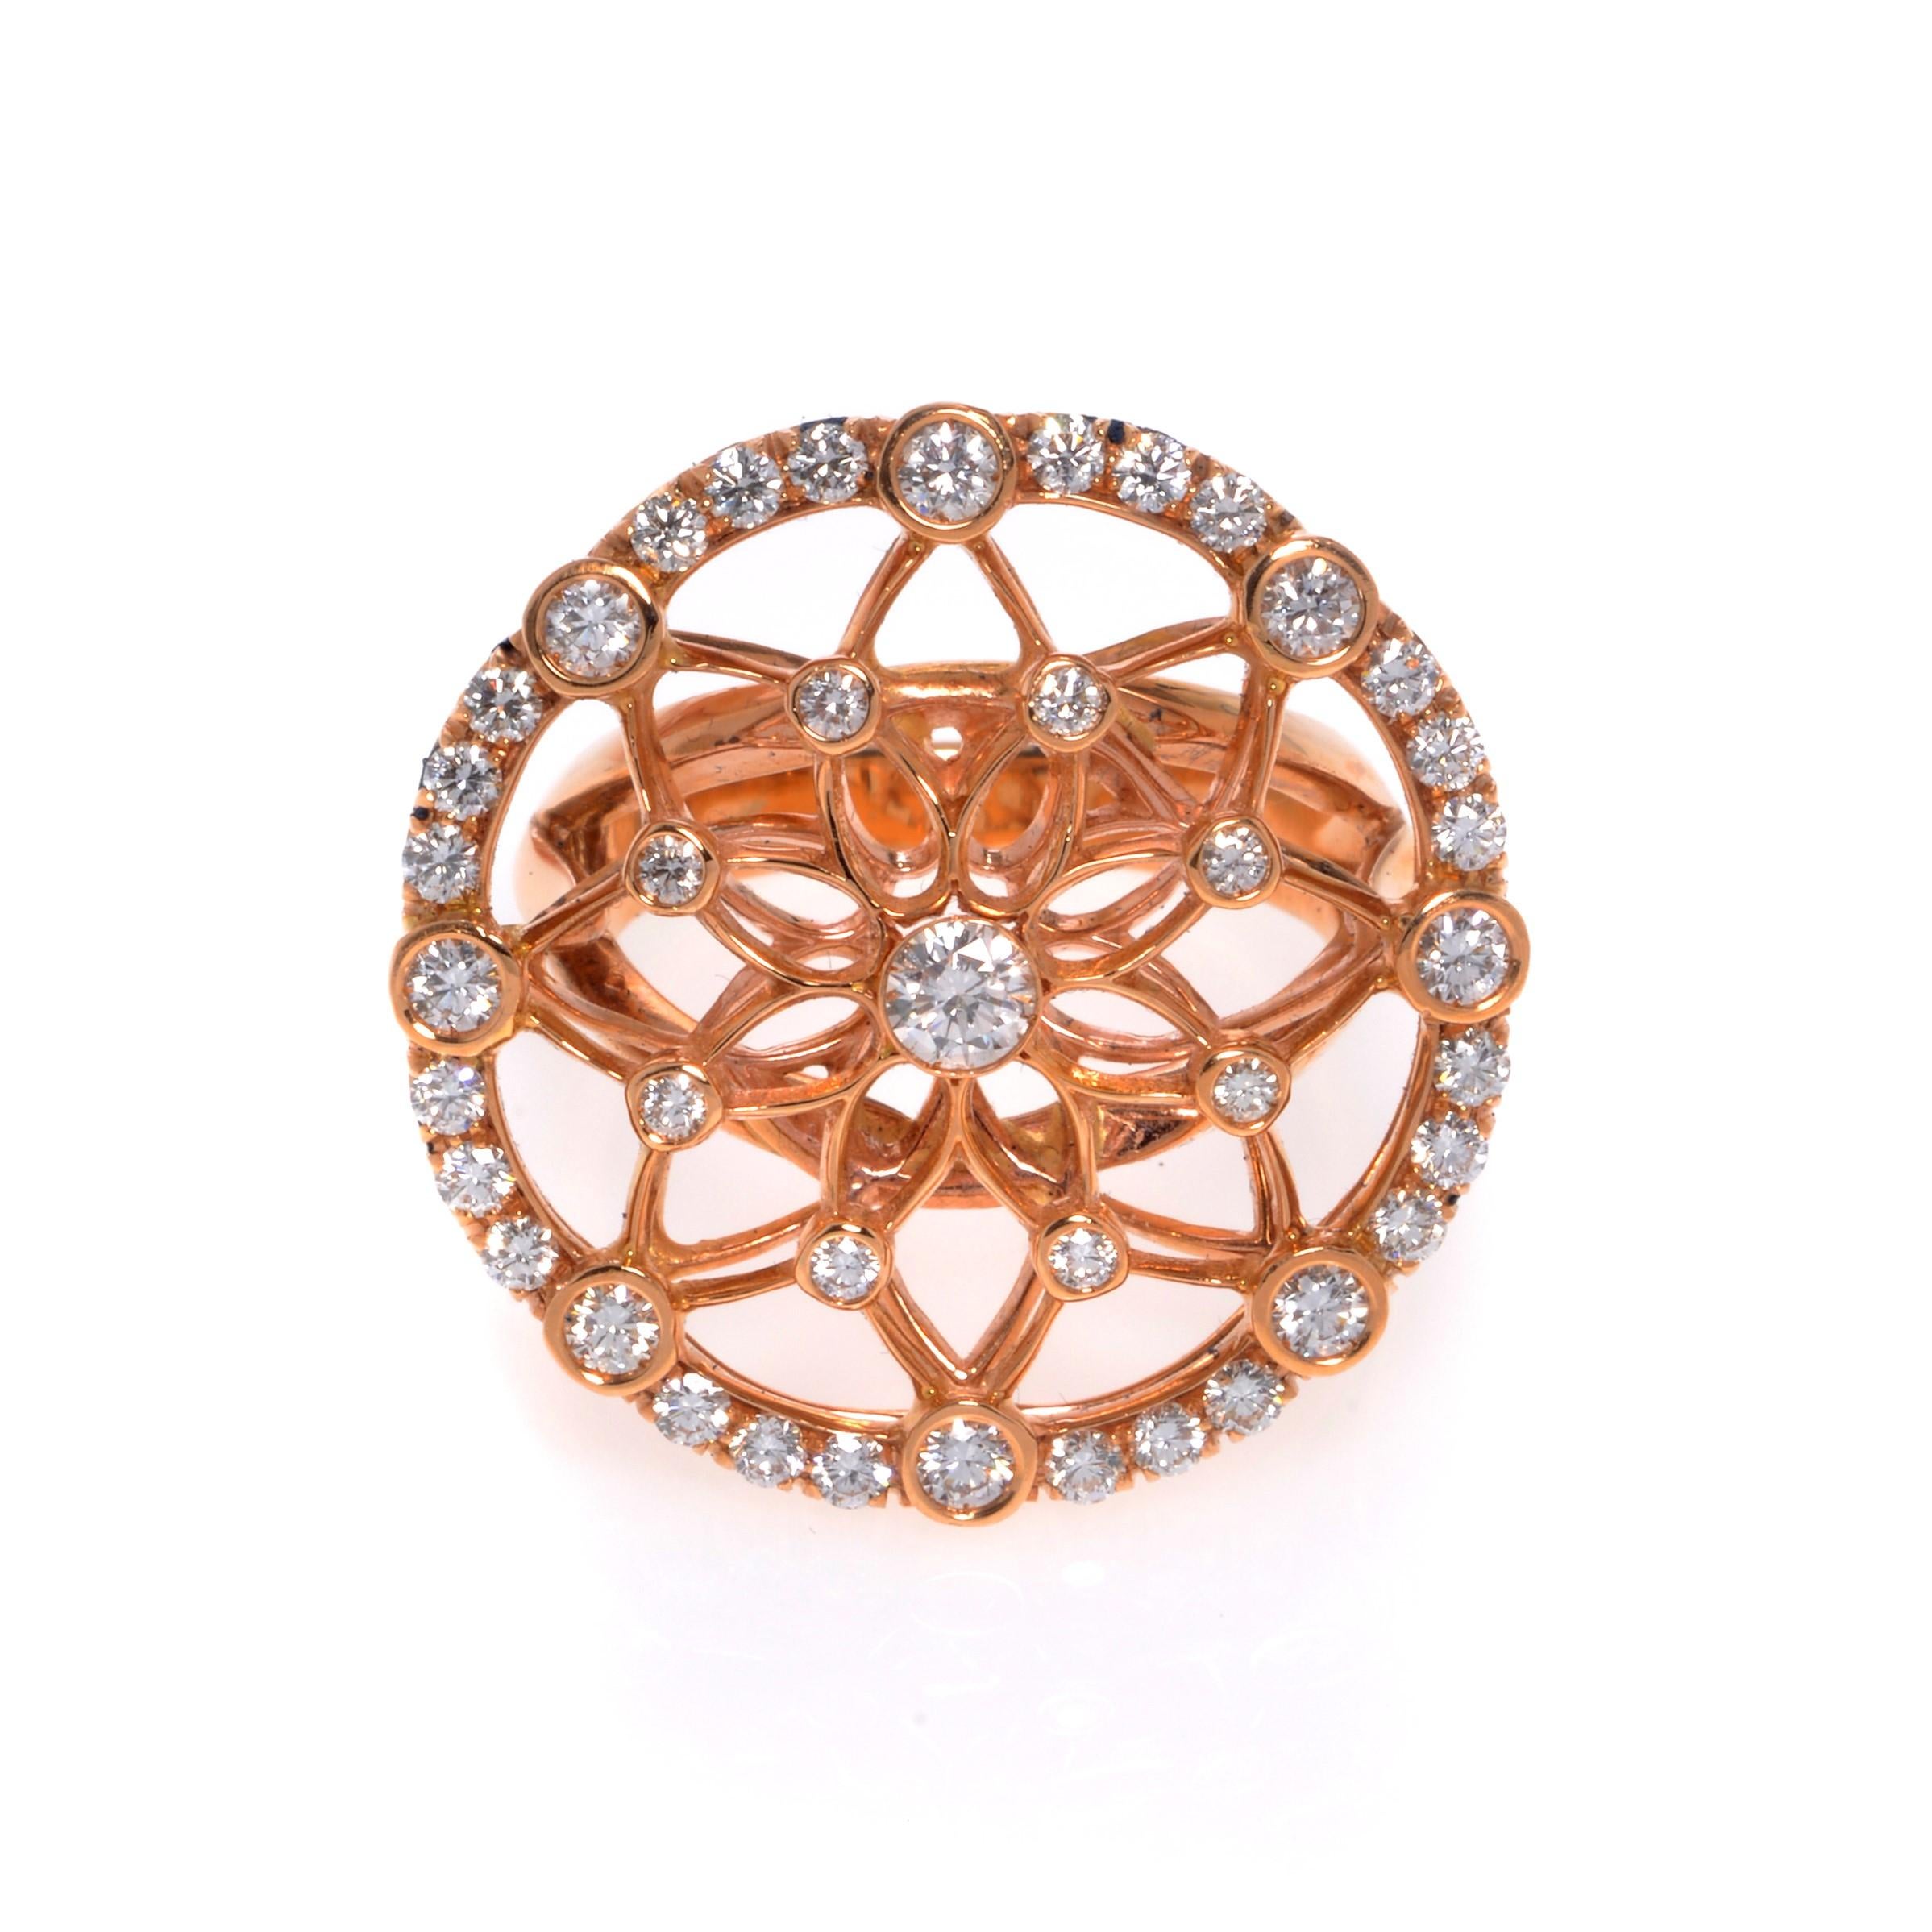 Luca Carati 18K rose gold diamond large circle cocktail ring. The ring is set with 1.21cttw of brilliant cut diamonds. Diamond color G and VVS-VS clarity. Ring size 6.75. Comes with box and a certificate.